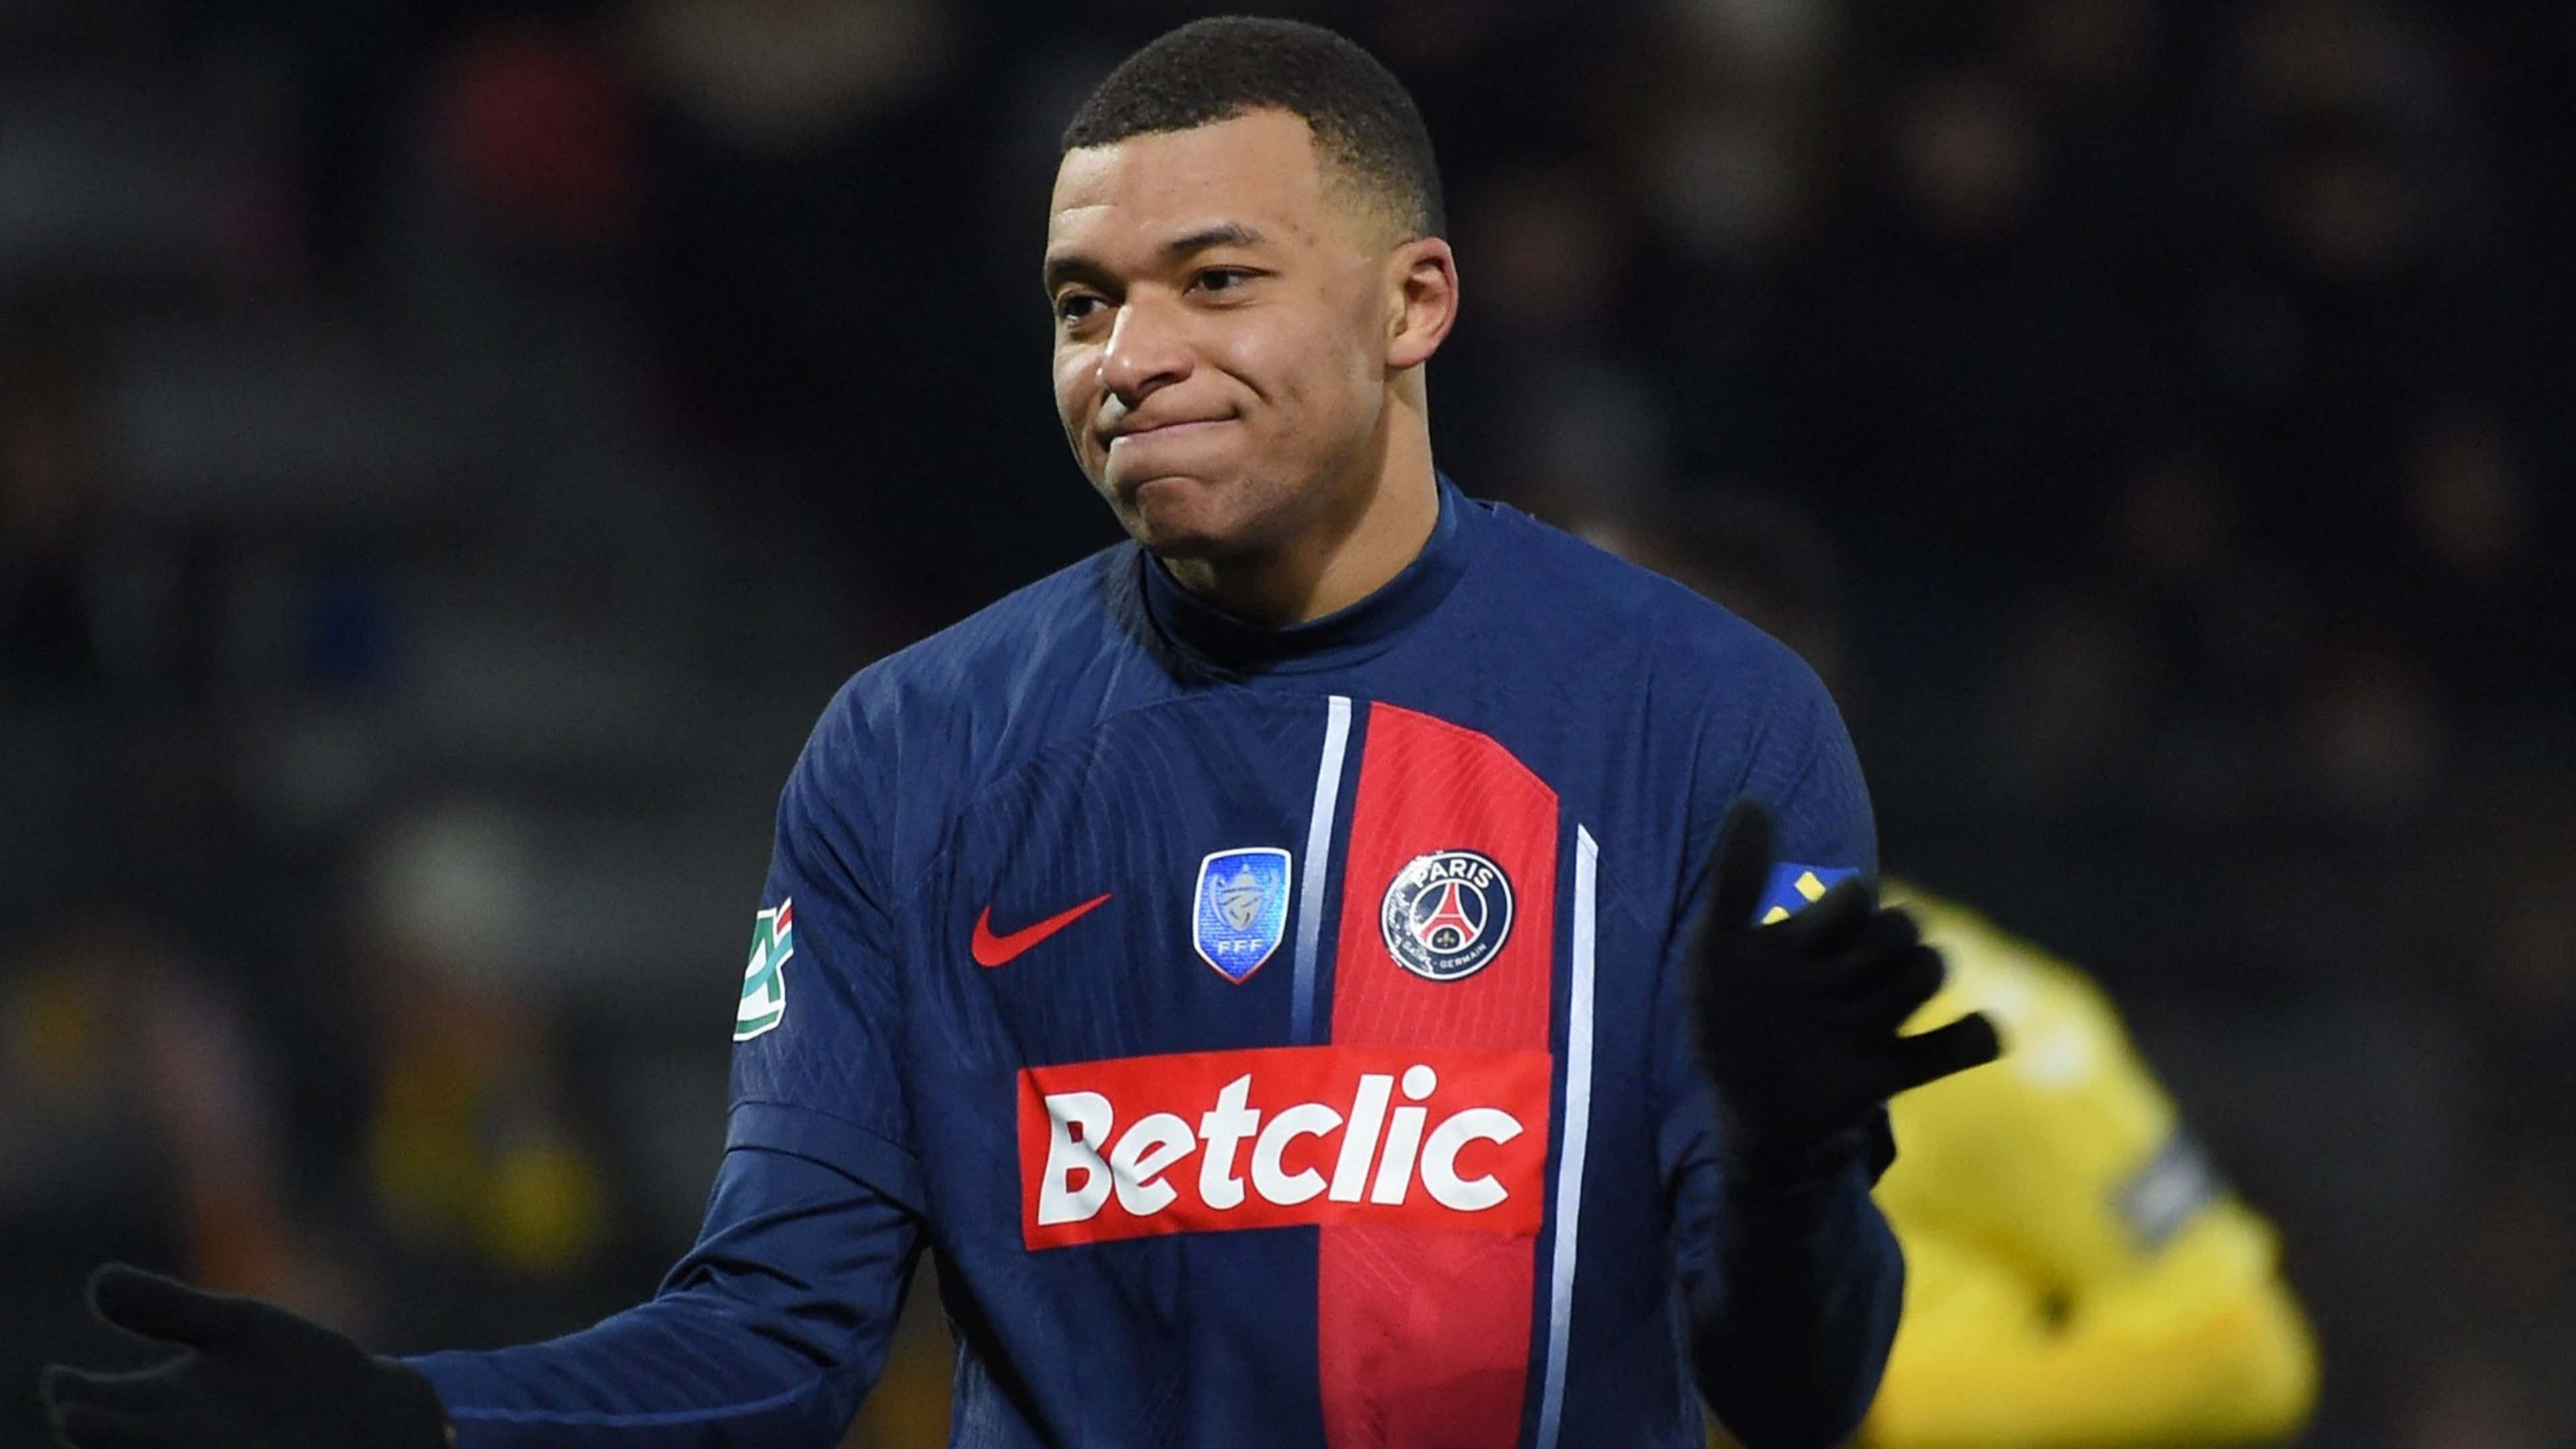 PSG Head Coach Enrique Hopes Mbappe Will Change His Mind About Leaving The Club